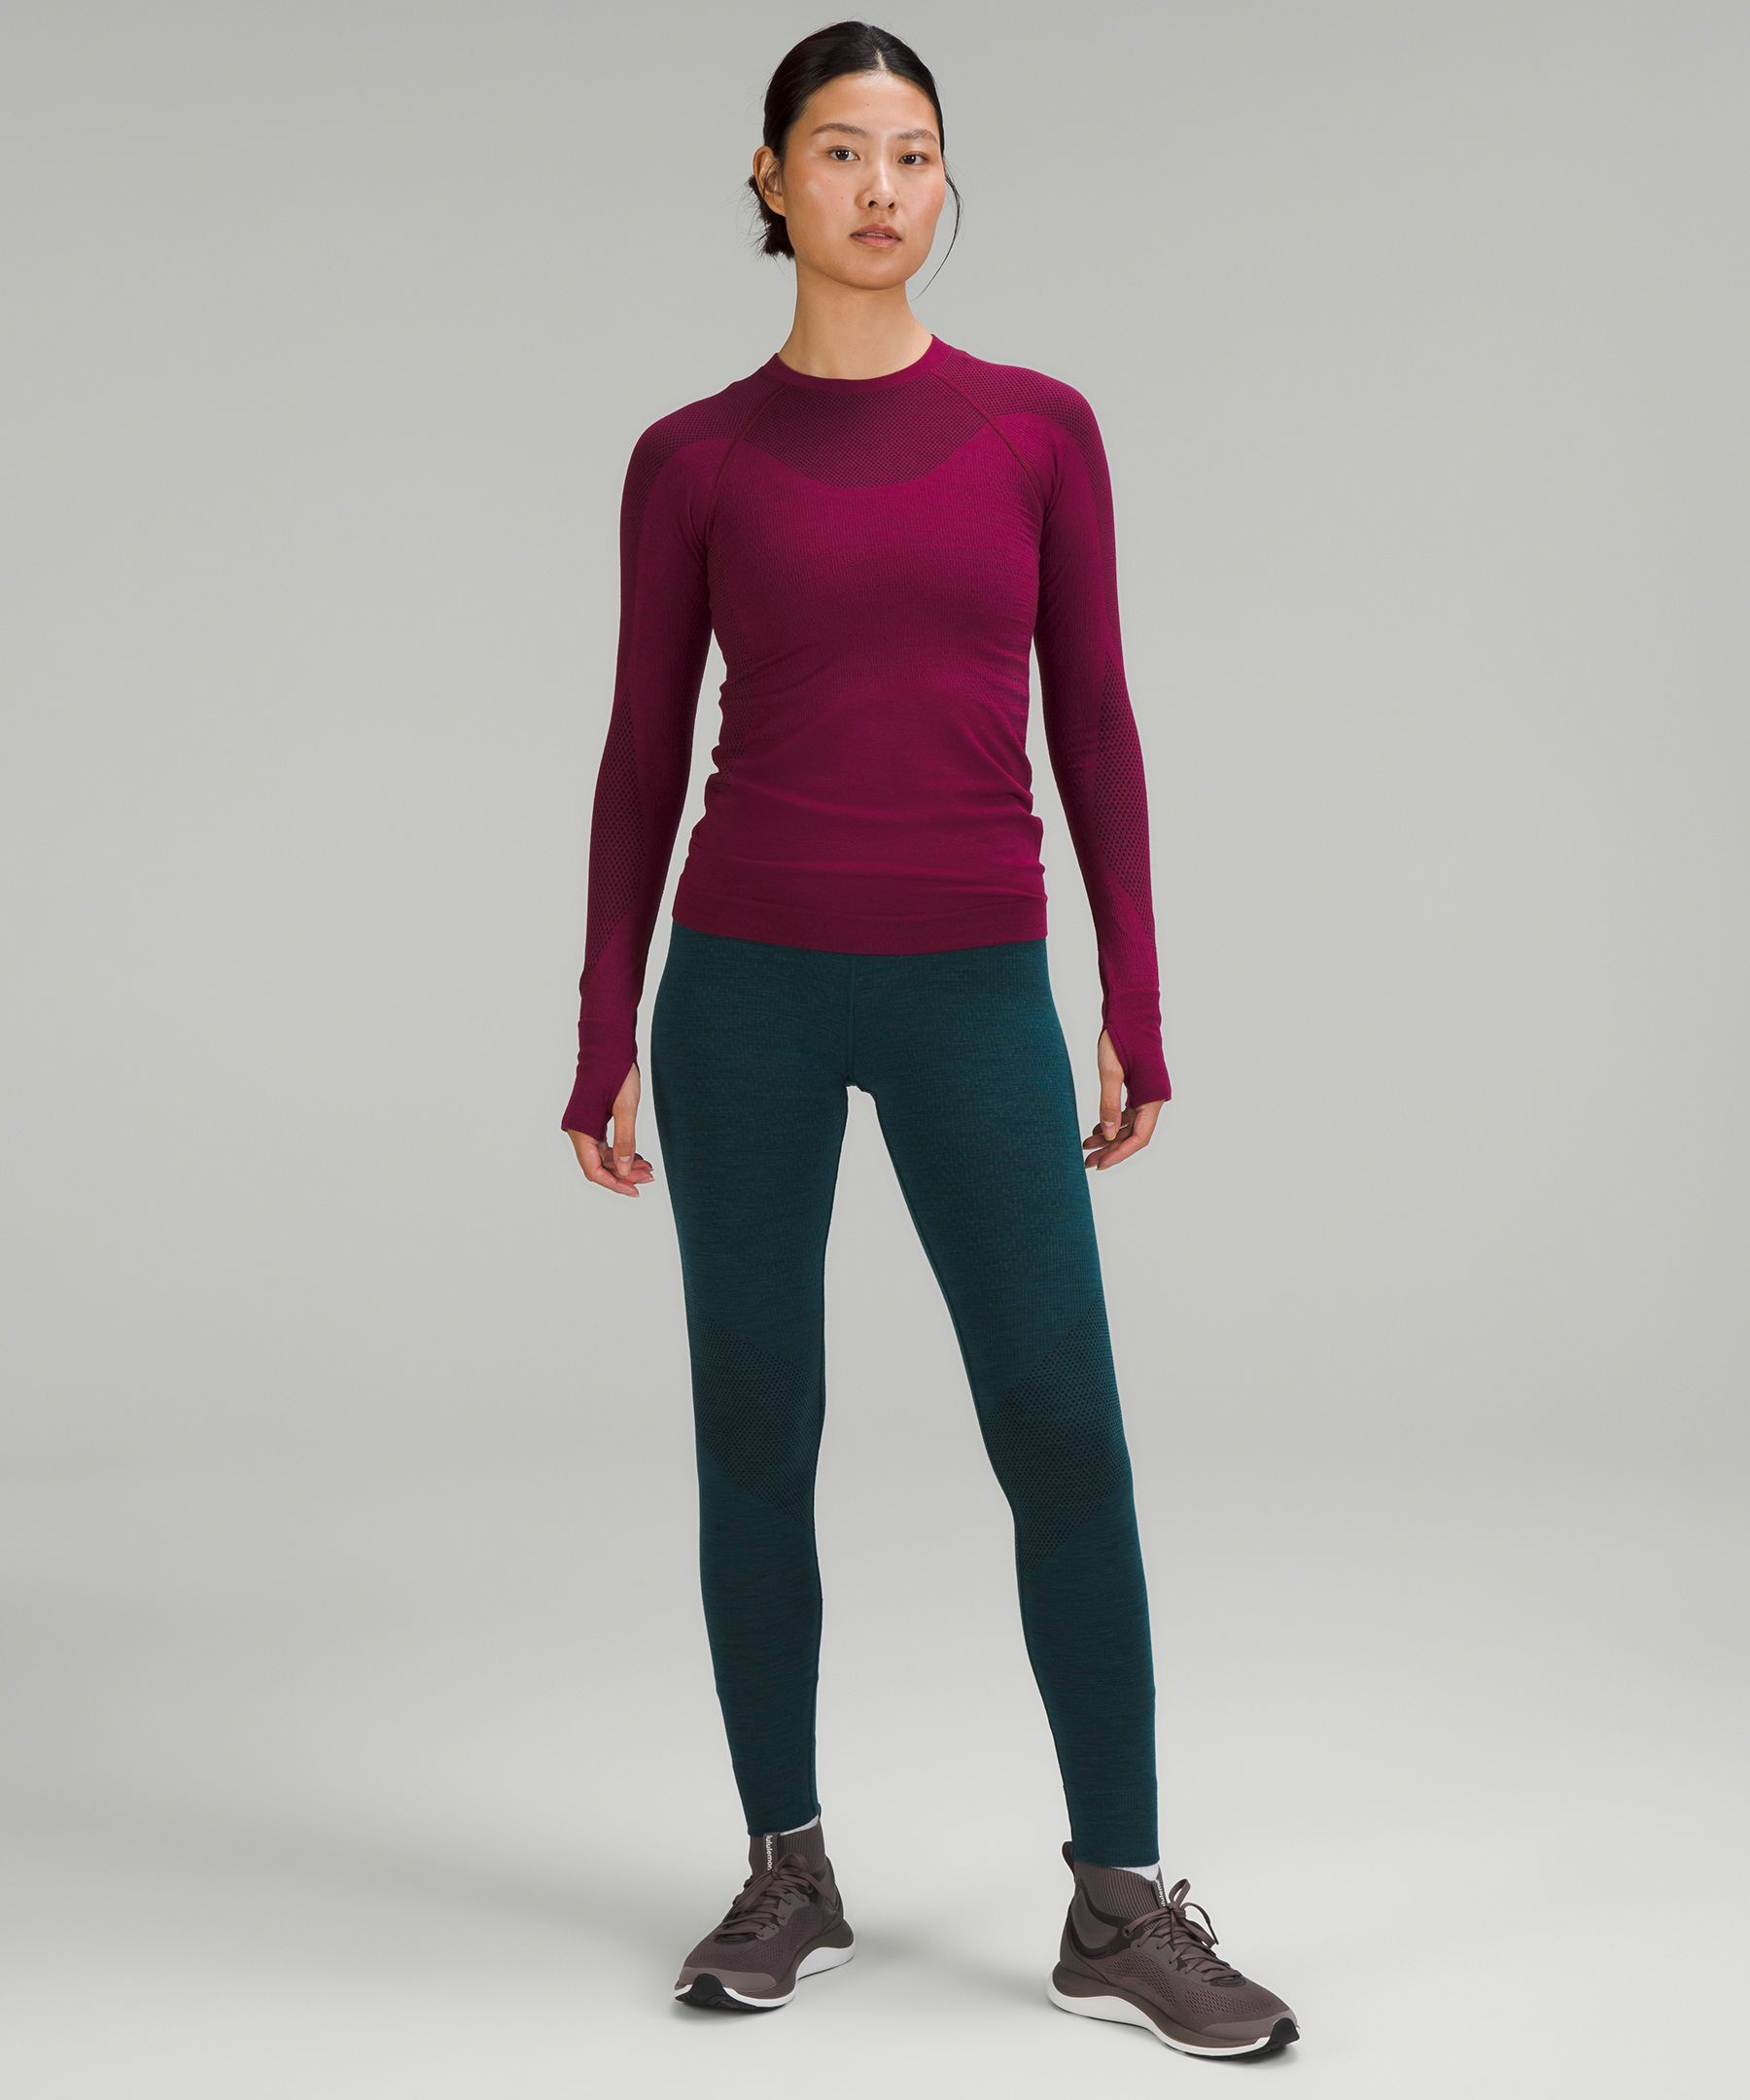 Reviews / thoughts on the keep the heat thermal tights? Are they